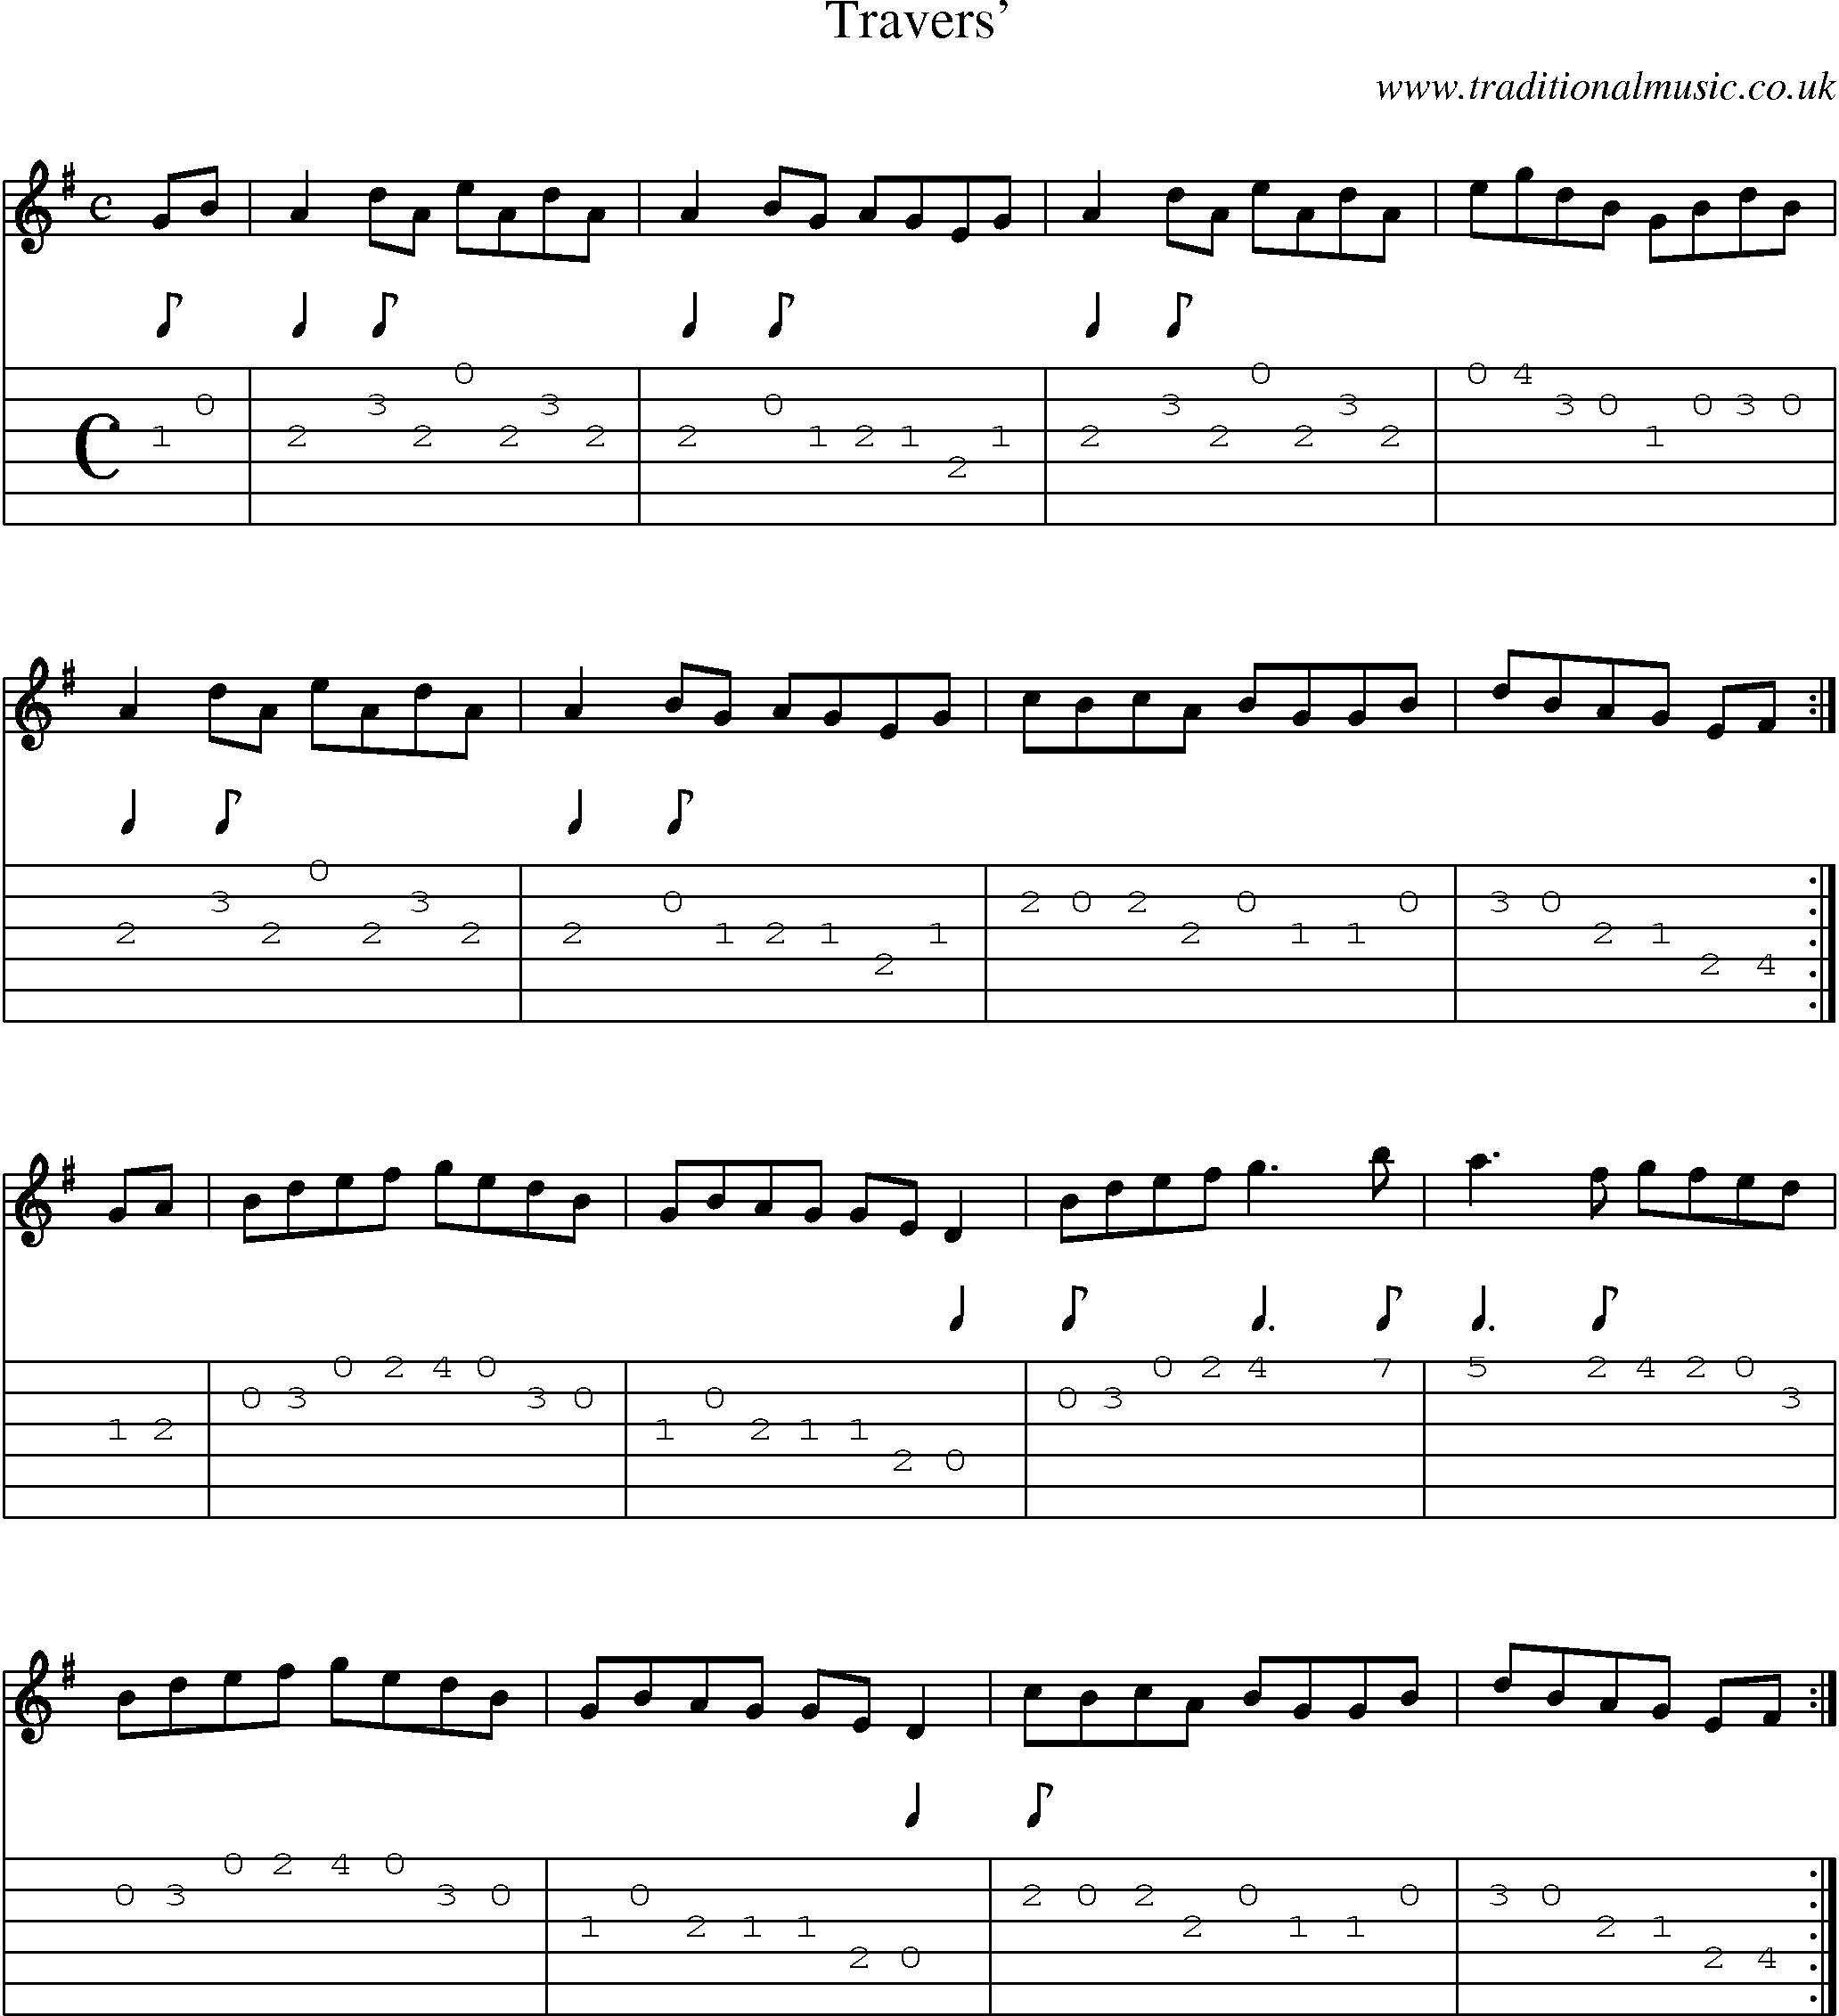 Music Score and Guitar Tabs for Travers